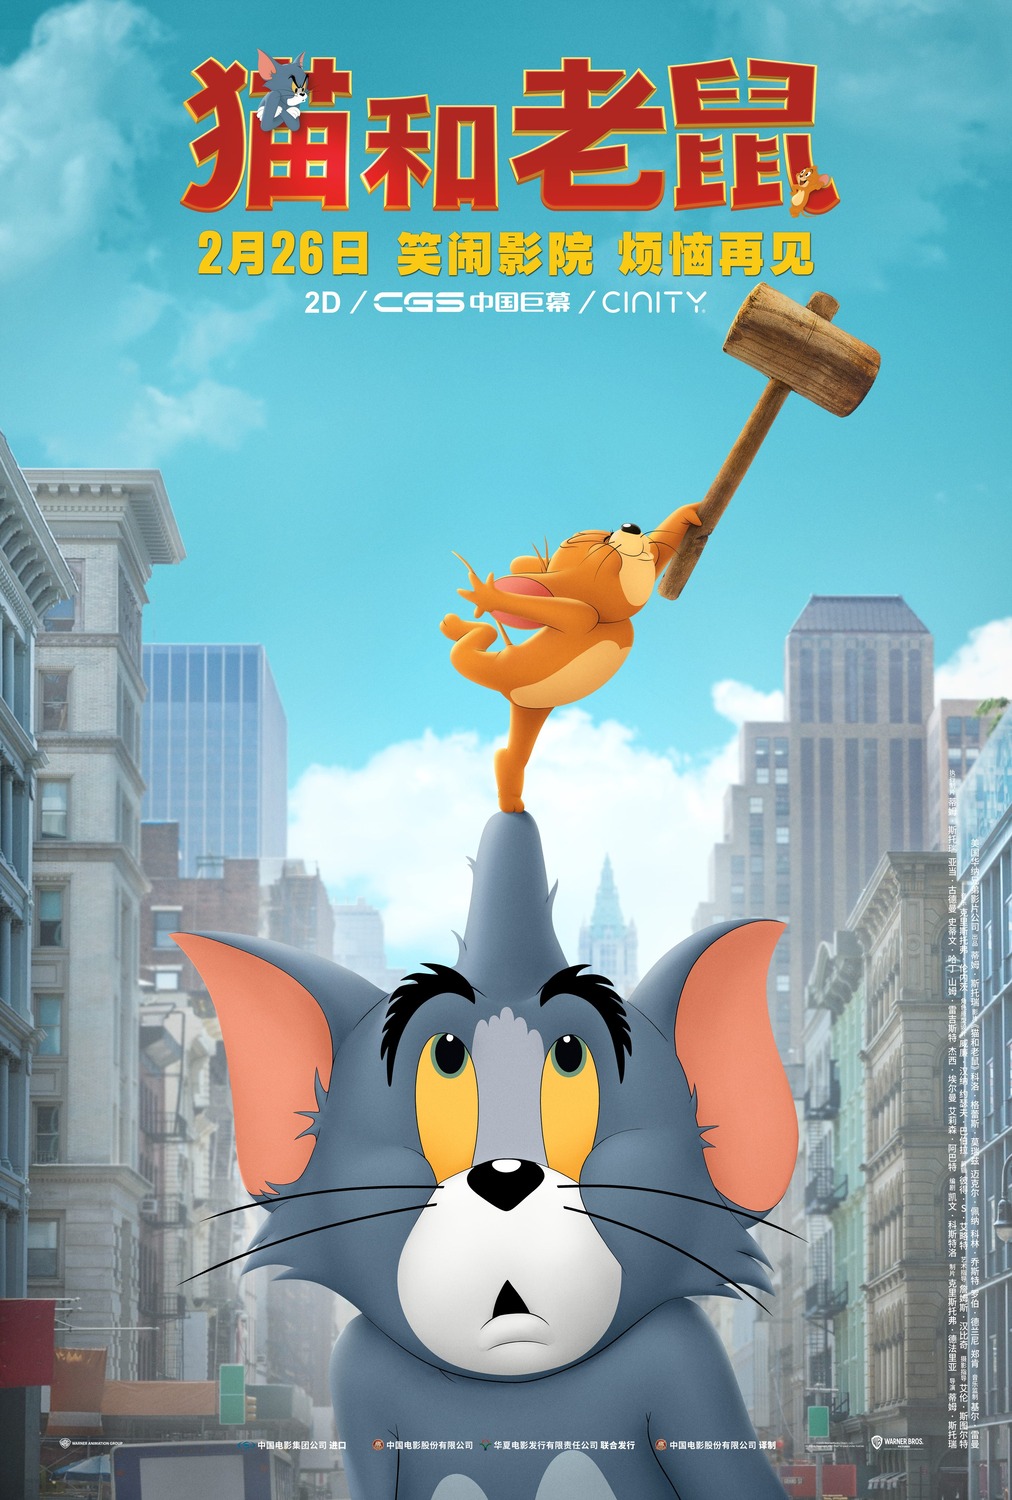 Extra Large Movie Poster Image for Tom and Jerry (#7 of 8)